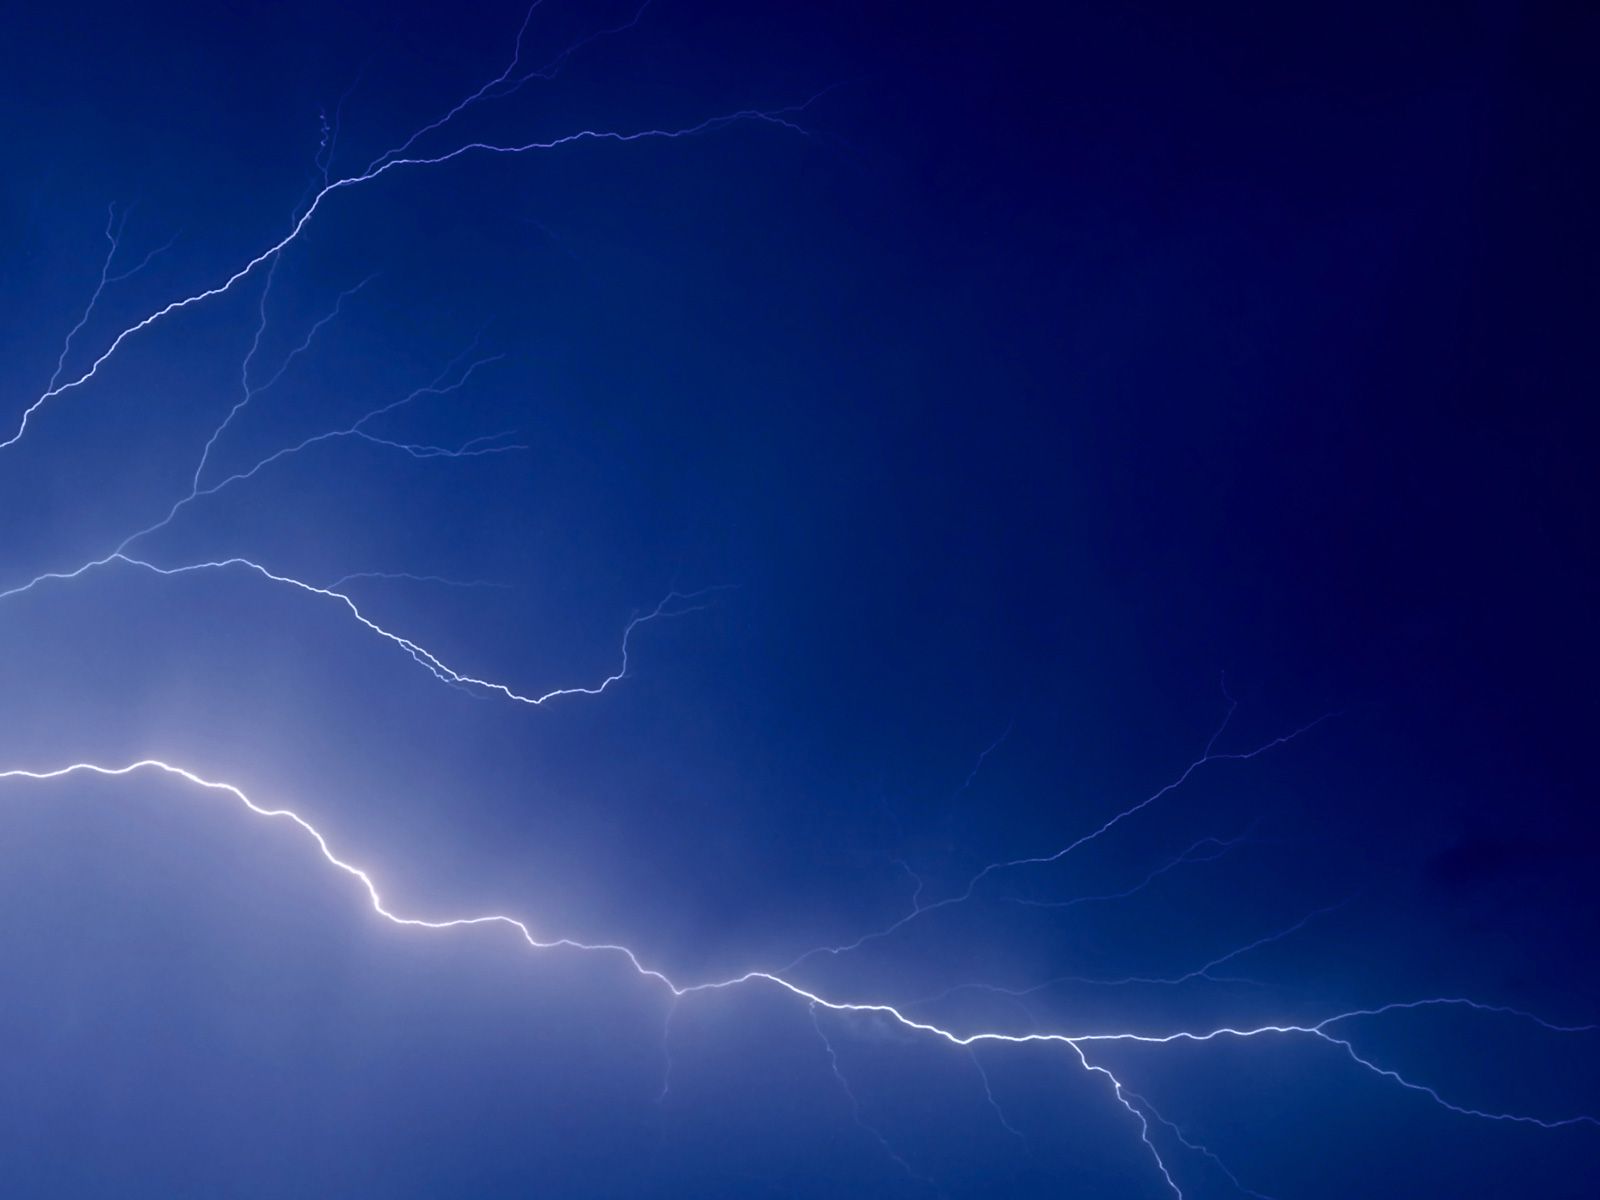 Lightning Effects Download PowerPoint Backgrounds - PPT Backgrounds